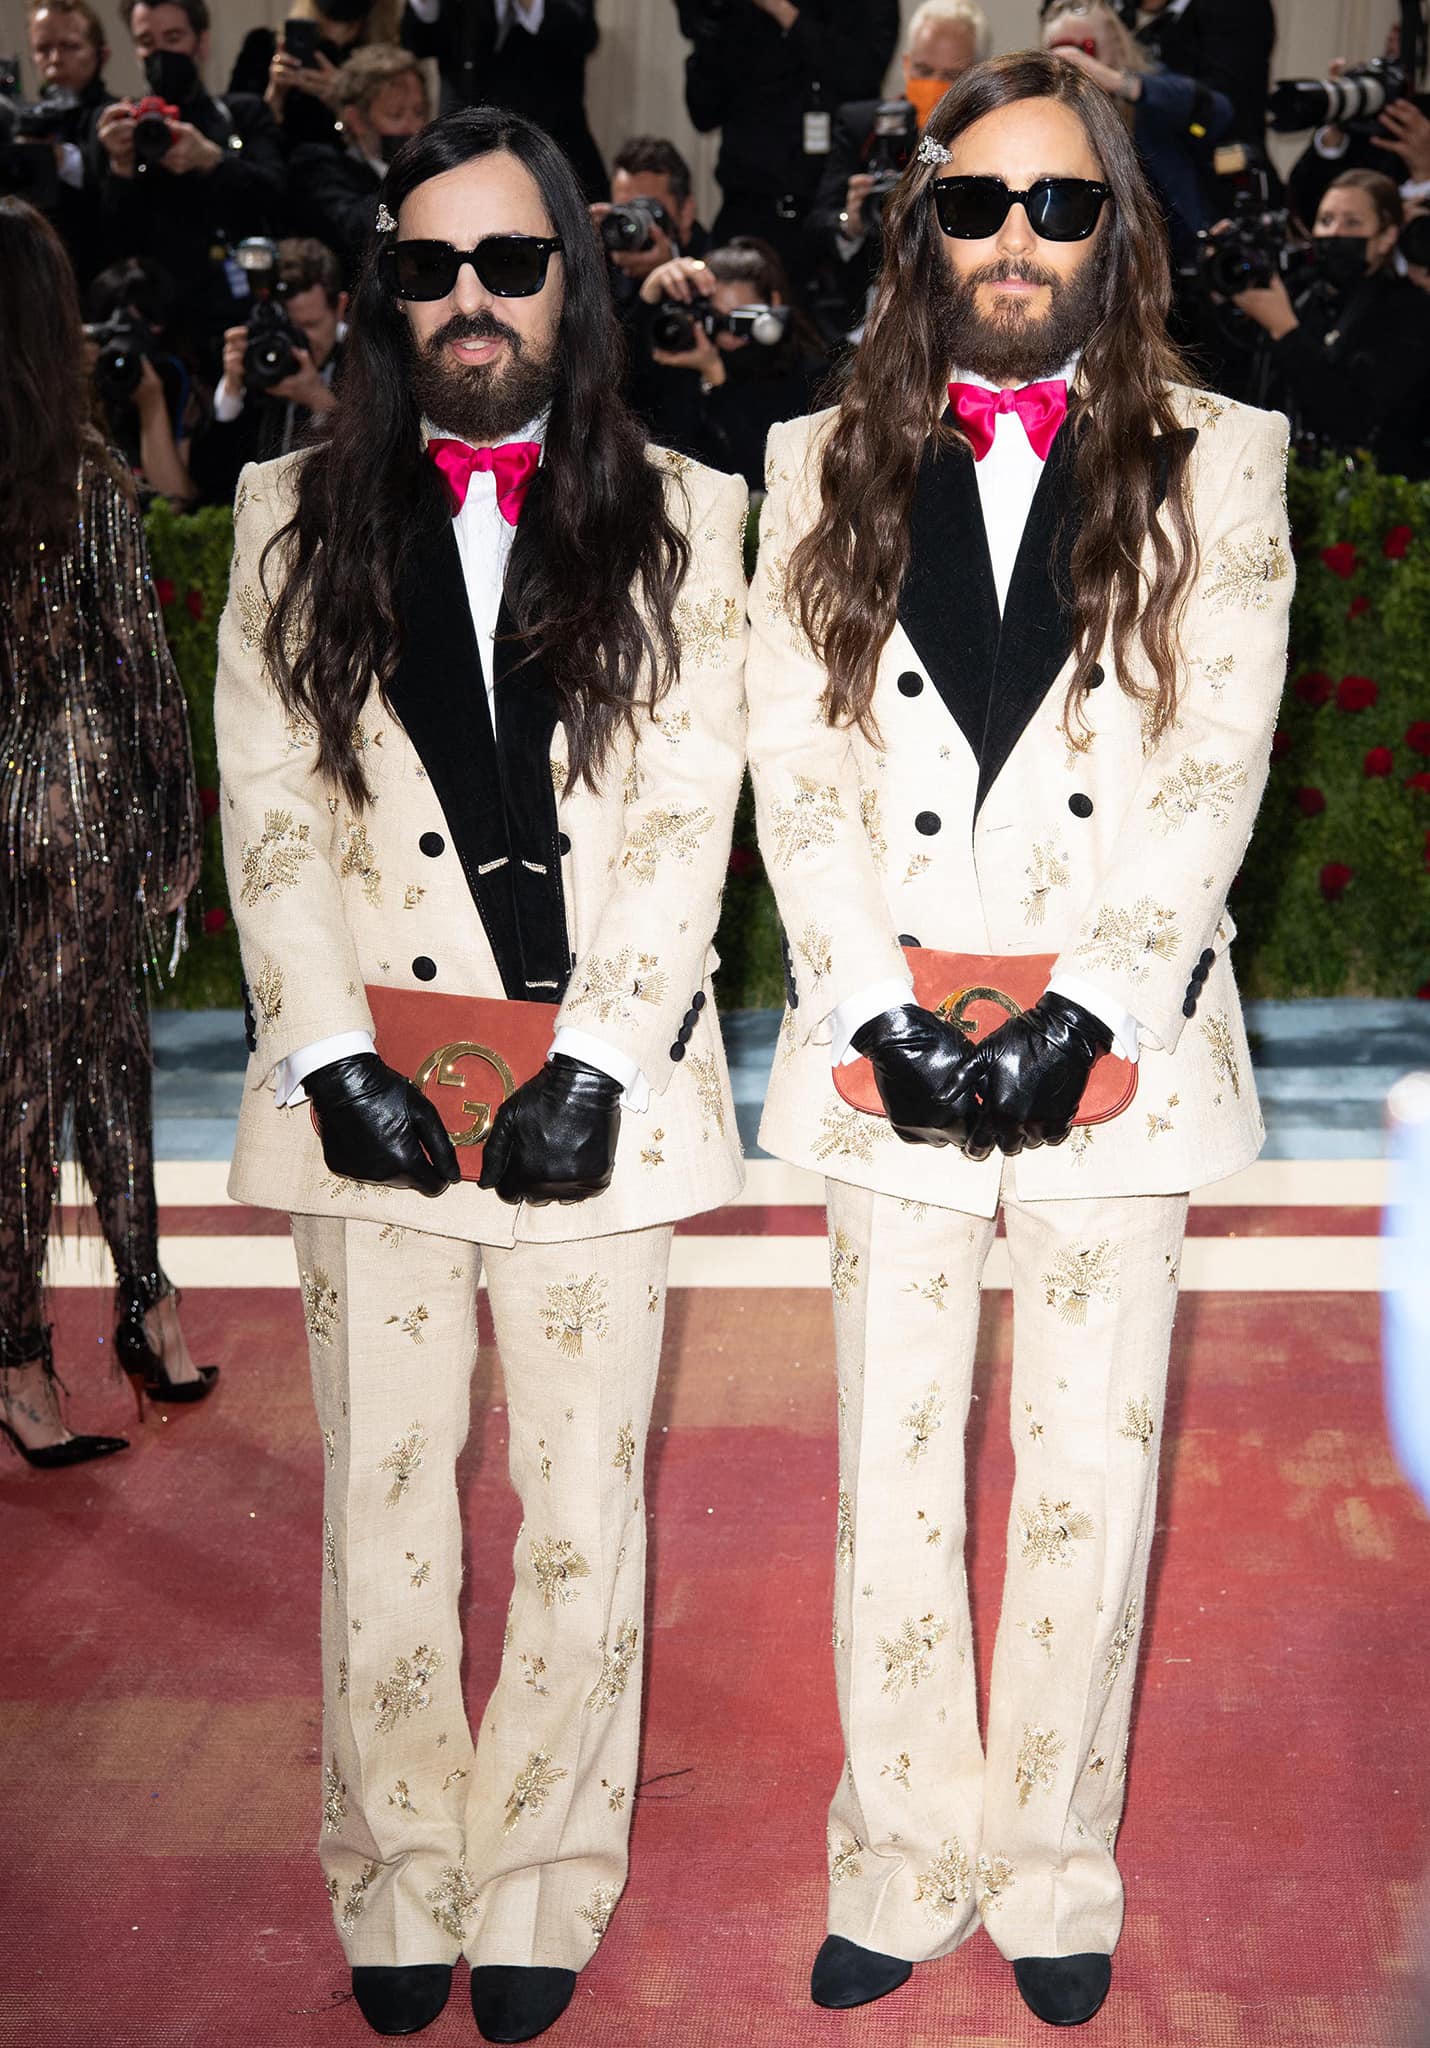 Gucci creative director Alessandro Michele and Jared Leto twin in matching Gucci outfits at the 2022 Met Gala